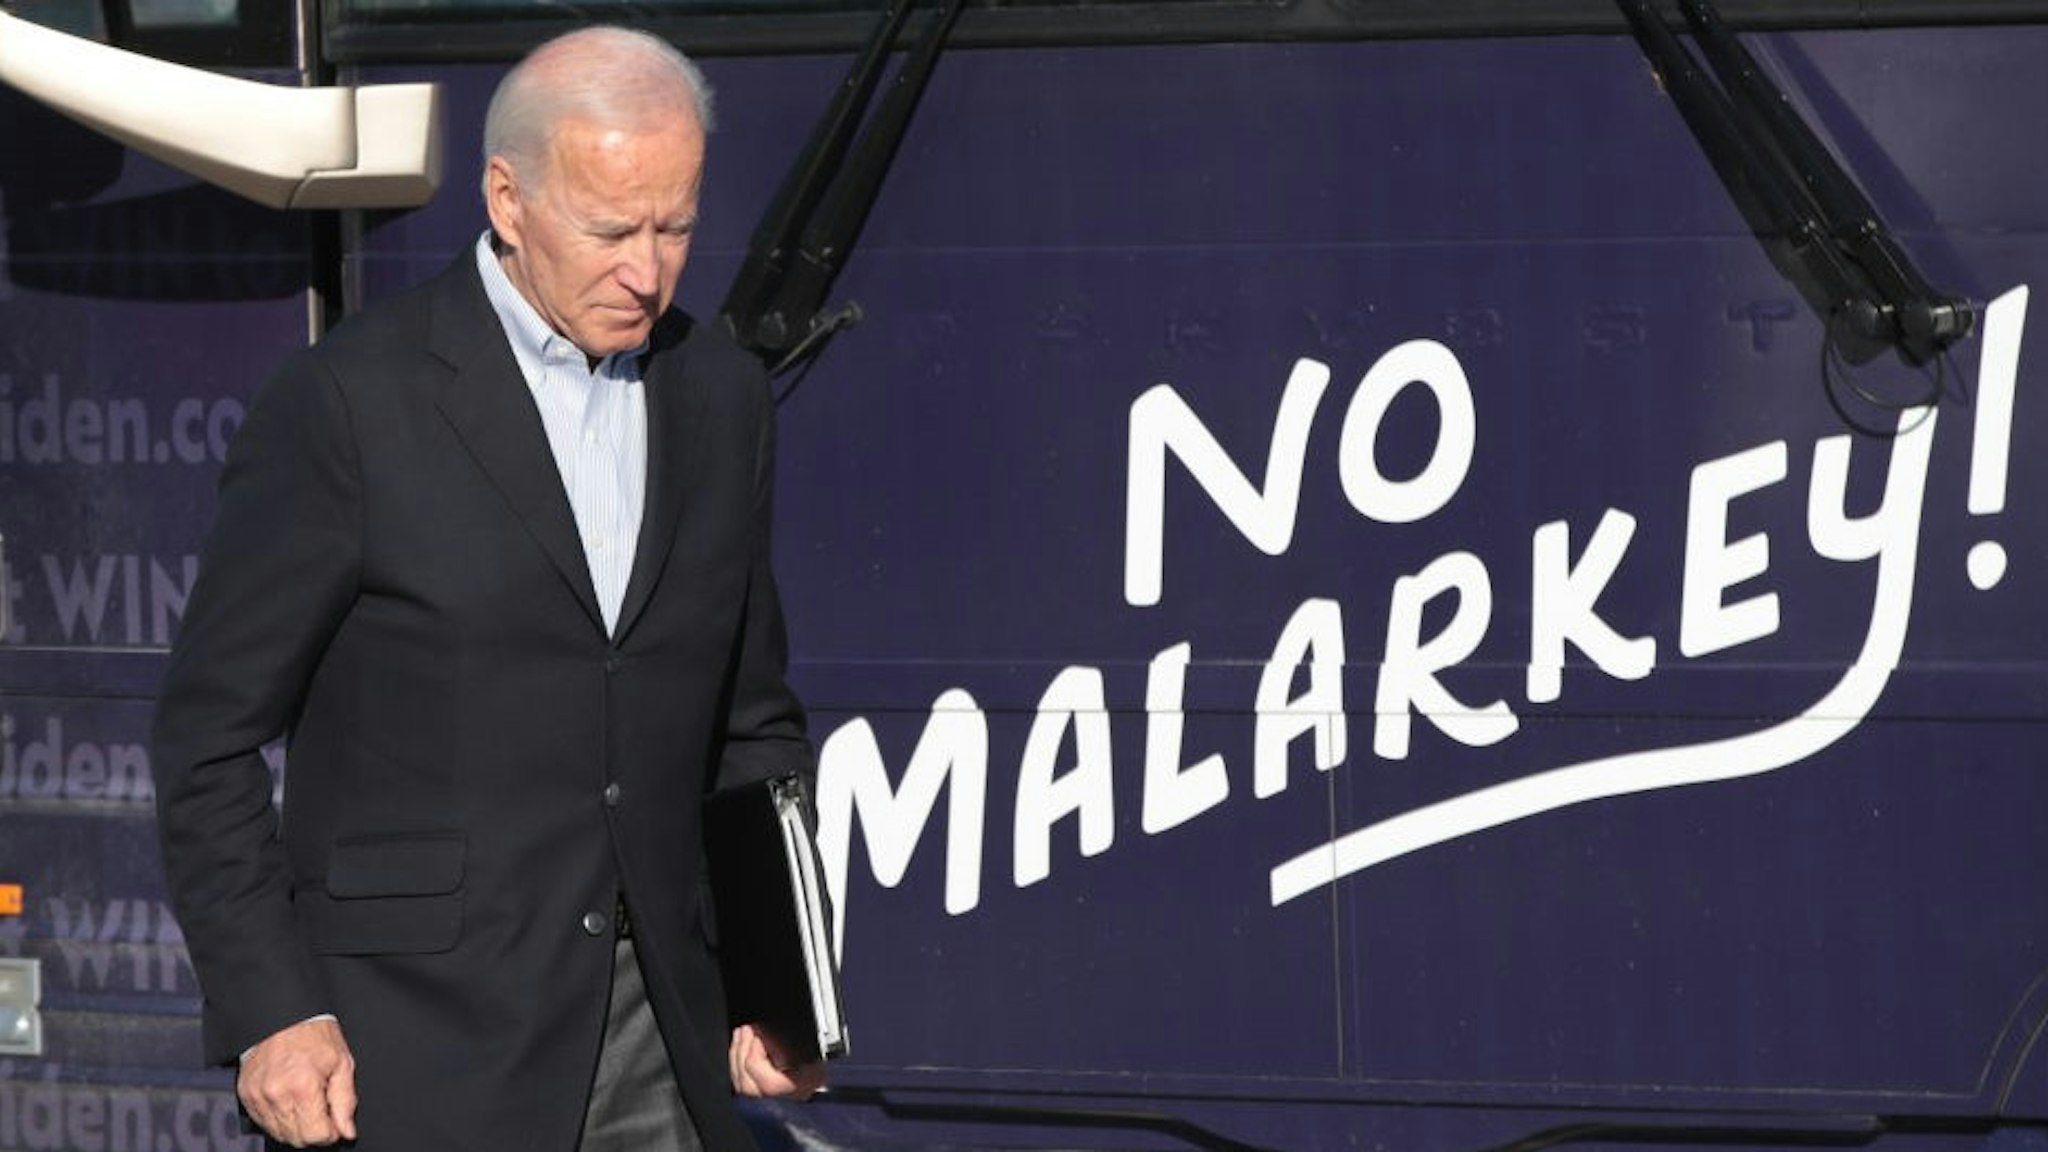 Democratic presidential candidate, former Vice President Joe Biden arrives at a campaign stop on December 2, 2019 in Emmetsburg, Iowa. The stop was part of his 650-mile "No Malarkey" campaign bus trip through rural Iowa. The 2020 Iowa Democratic caucuses will take place on February 3, 2020, making it the first nominating contest for the Democratic Party in choosing their presidential candidate to face Donald Trump in the 2020 election.